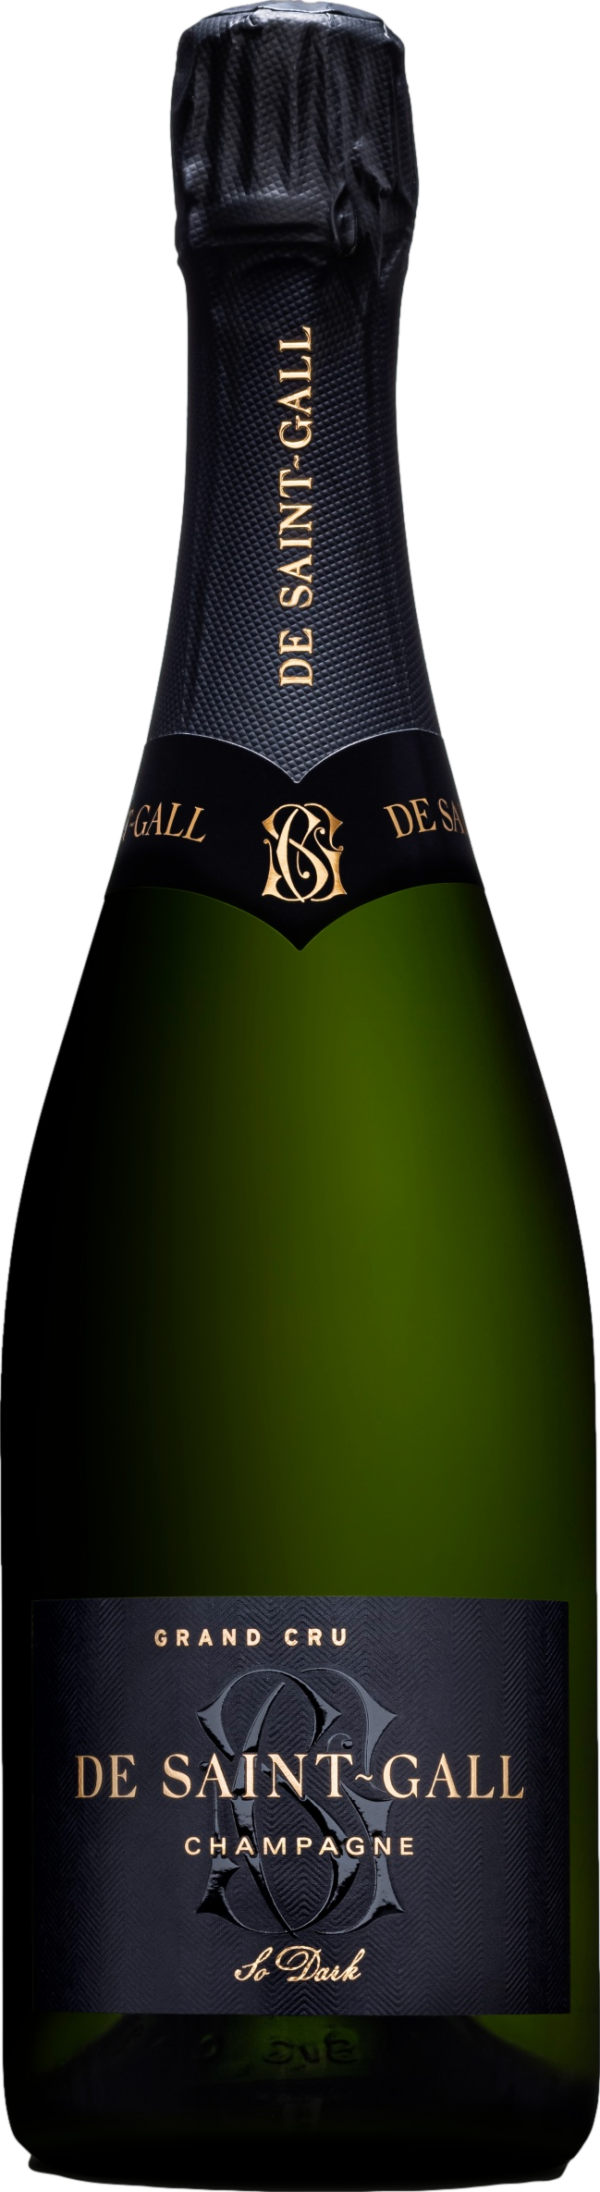 Product image of Champagne De Saint Gall So Dark Grand Cru 2016 from 8wines